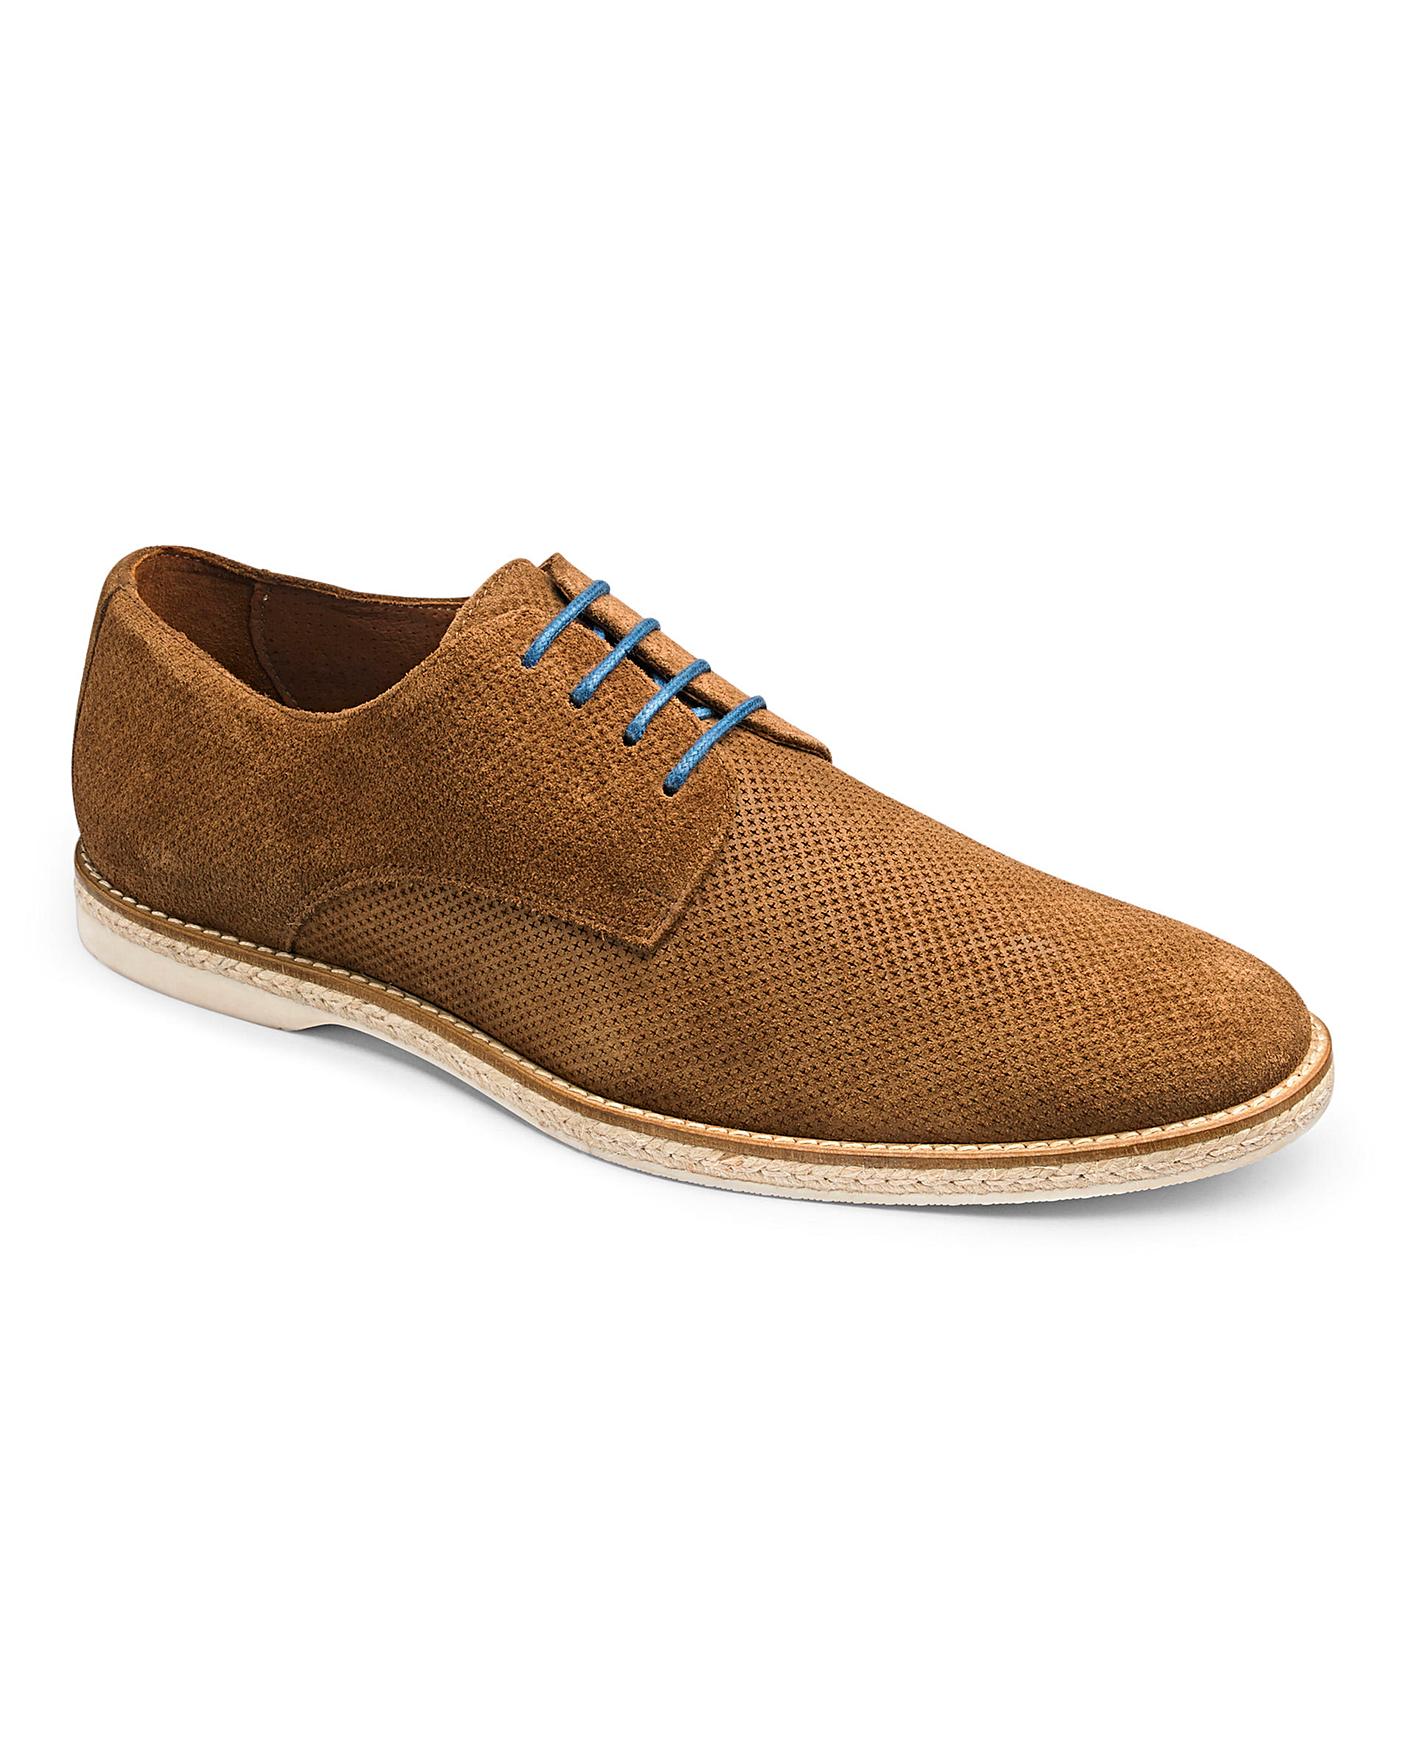 Barrock Perforated Derby Shoe